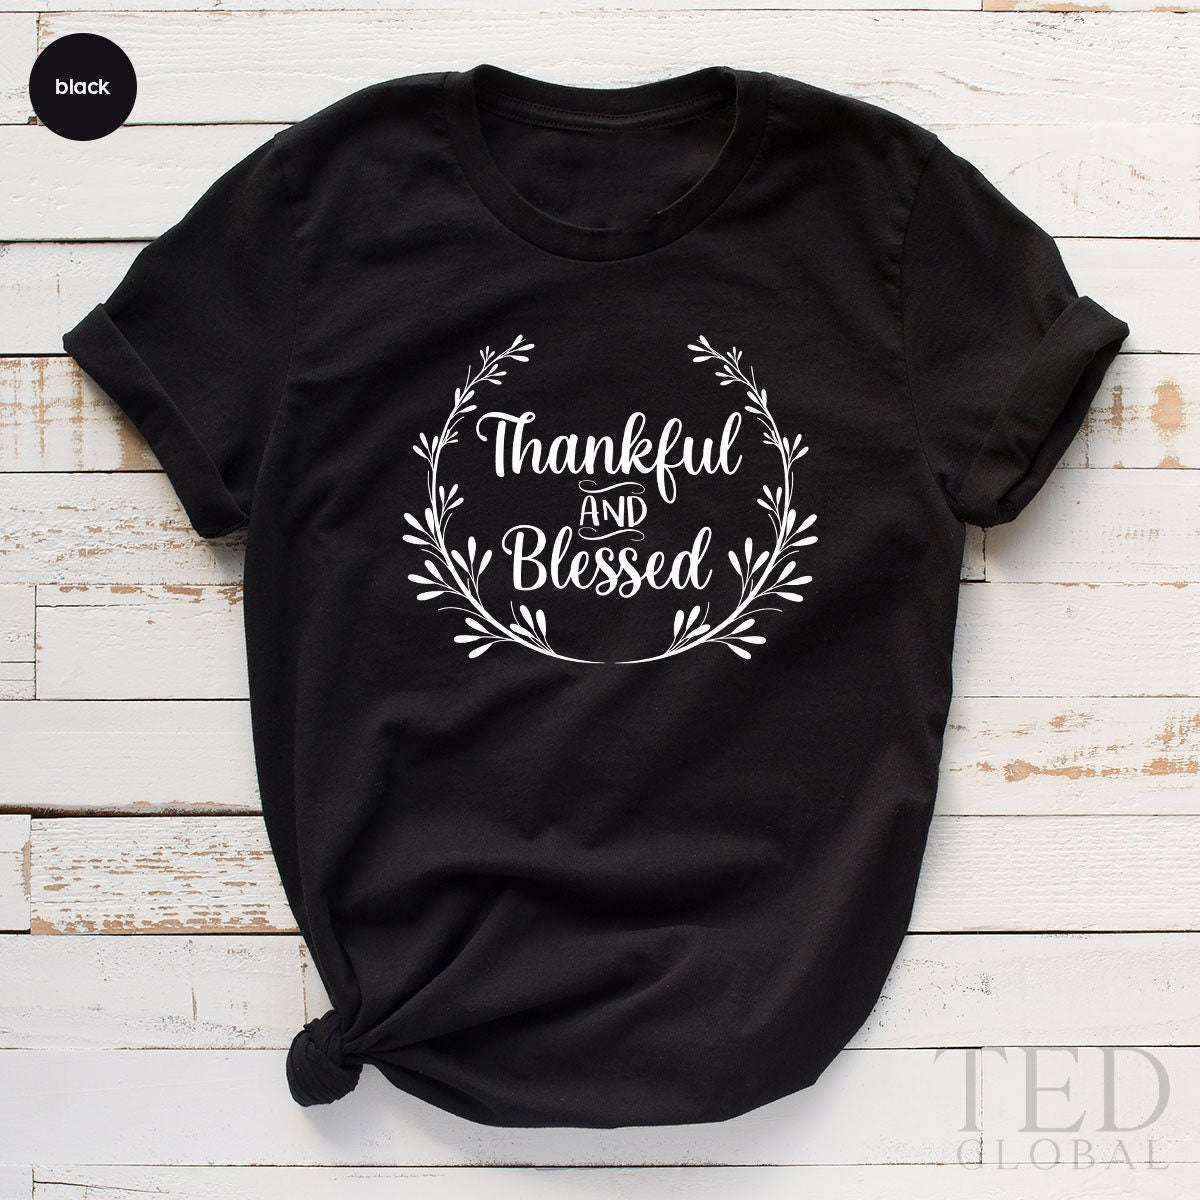 Cute Floral Thankful And Blessed T-Shirt, Funny Fall T Shirt, Thanksgiving Shirts, Autumn Shirt, Family Fall TShirt, Gift For Thanksgiving - Fastdeliverytees.com